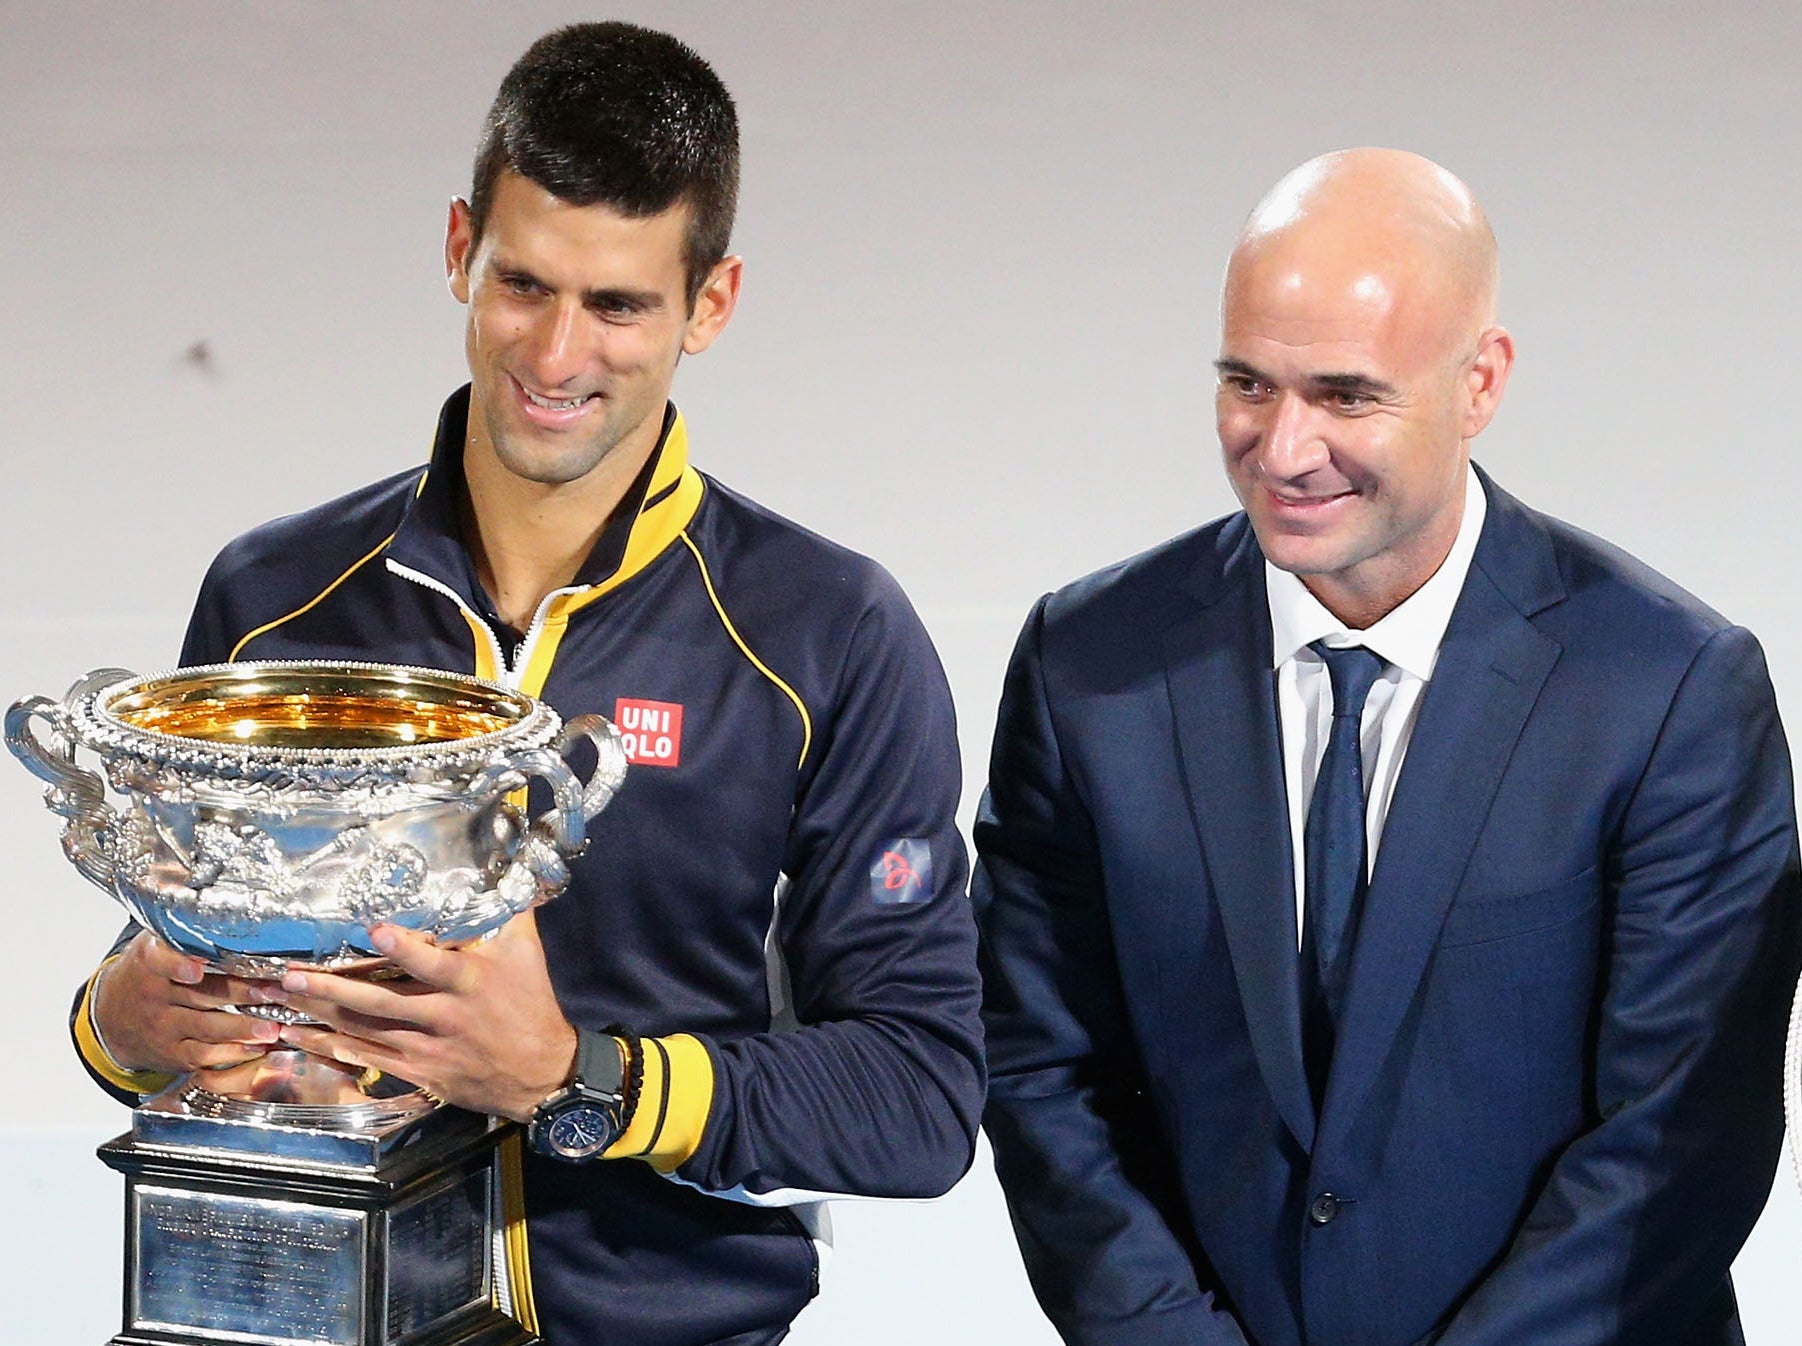 Agassi will work with Djokovic at this year's French Open